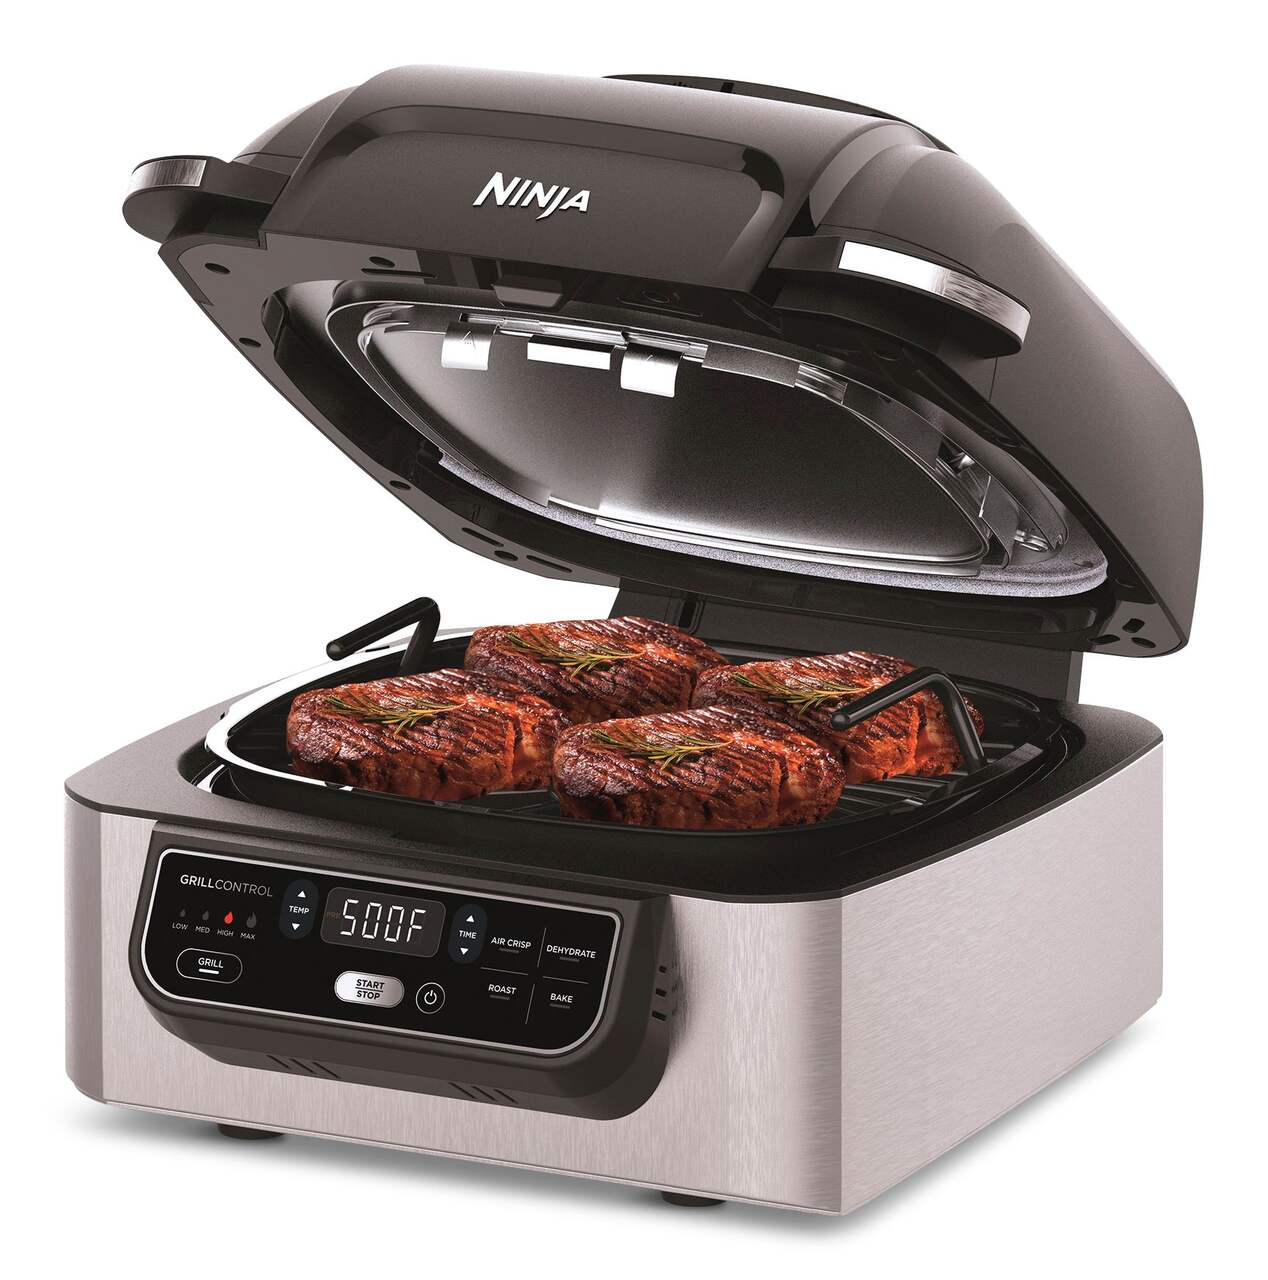 https://media-www.canadiantire.ca/product/living/kitchen/kitchen-appliances/0438262/ninja-foodi-airgrill-44480470-2283-4c73-9456-6be6d0726826-jpgrendition.jpg?imdensity=1&imwidth=1244&impolicy=mZoom